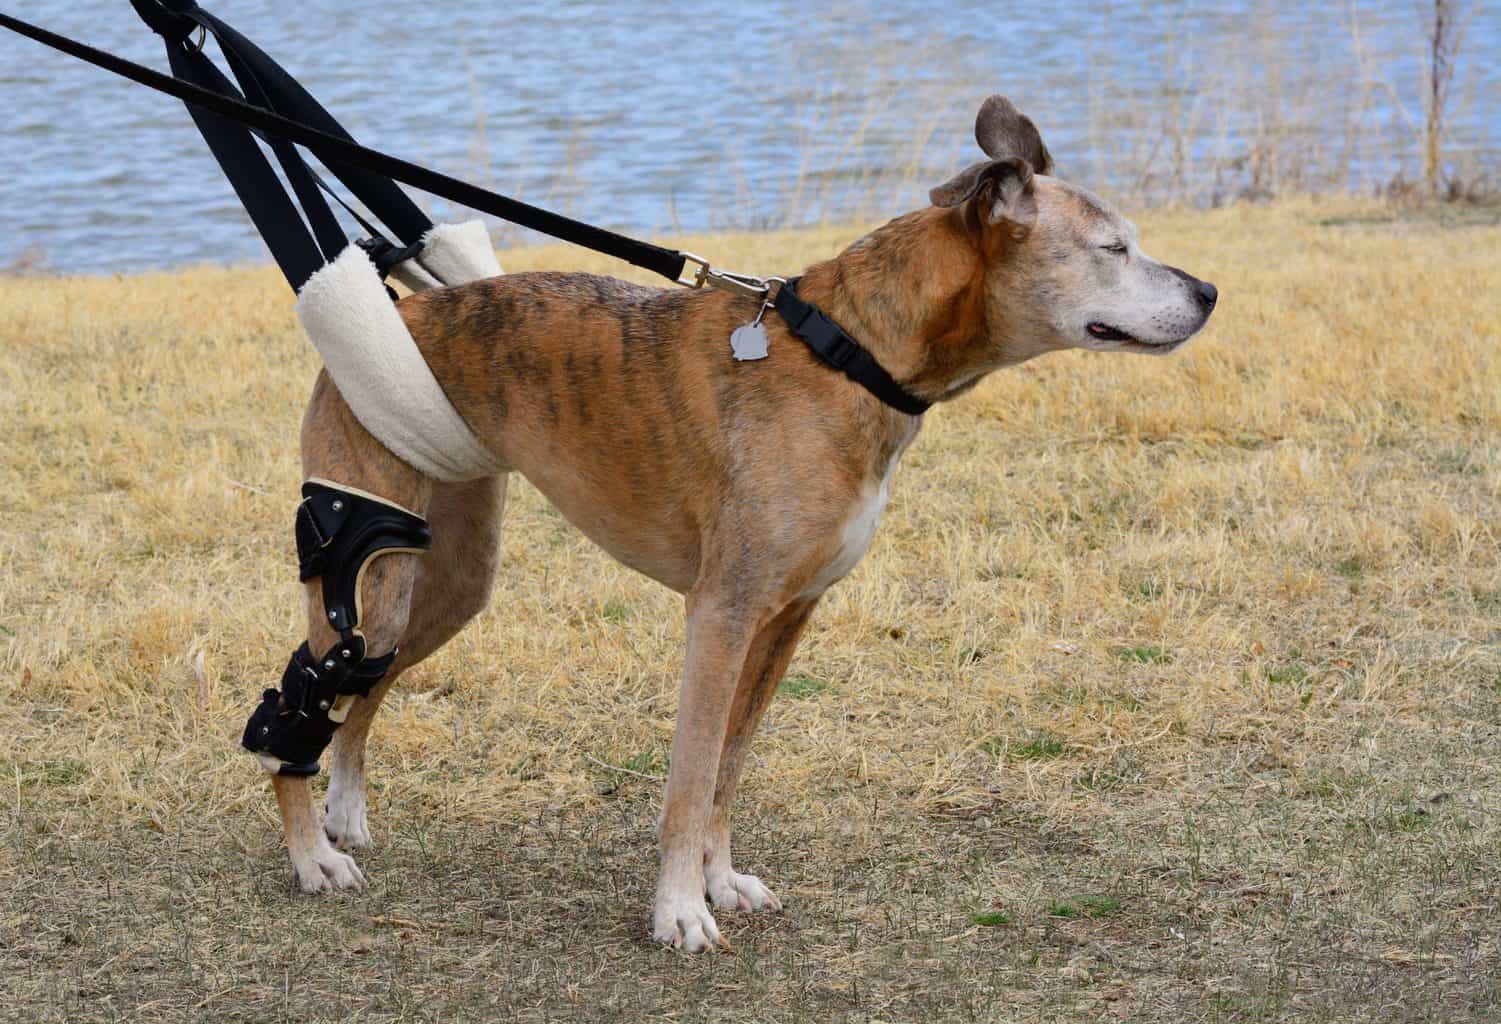 Dog with a a rear leg limp wears a brace and owner helps him walk using a sling. Common causes of hind leg limping include hip dysplasia, patellar luxation, or a ligament rupture.